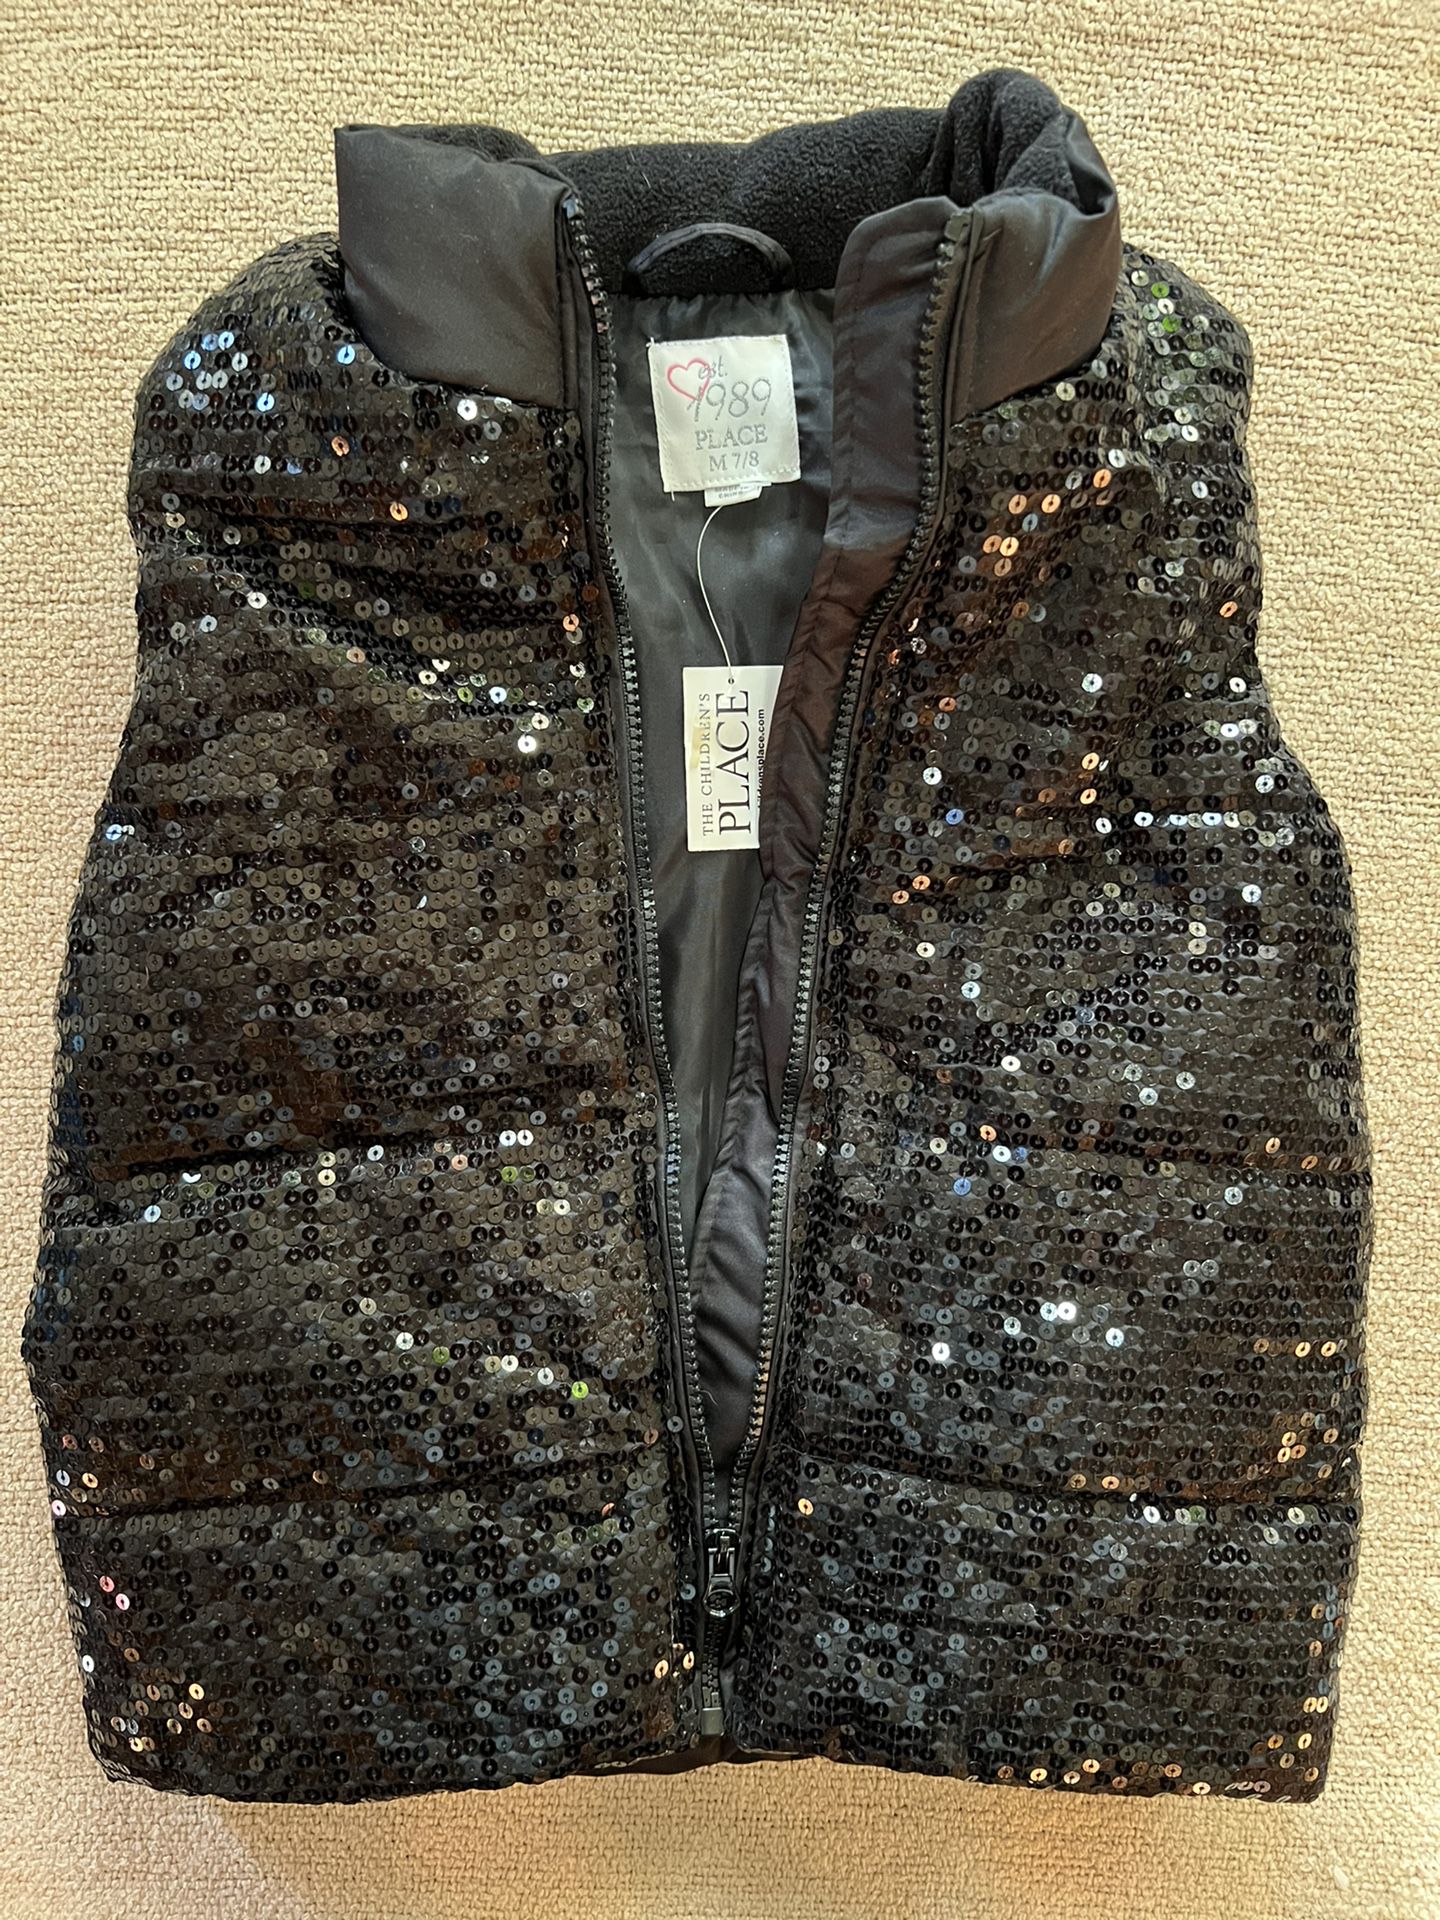 Girls Puffer Vest Jackets Size 7/8T, Set of 2 - Fall/Winter Outerwear - New, Childrens Place